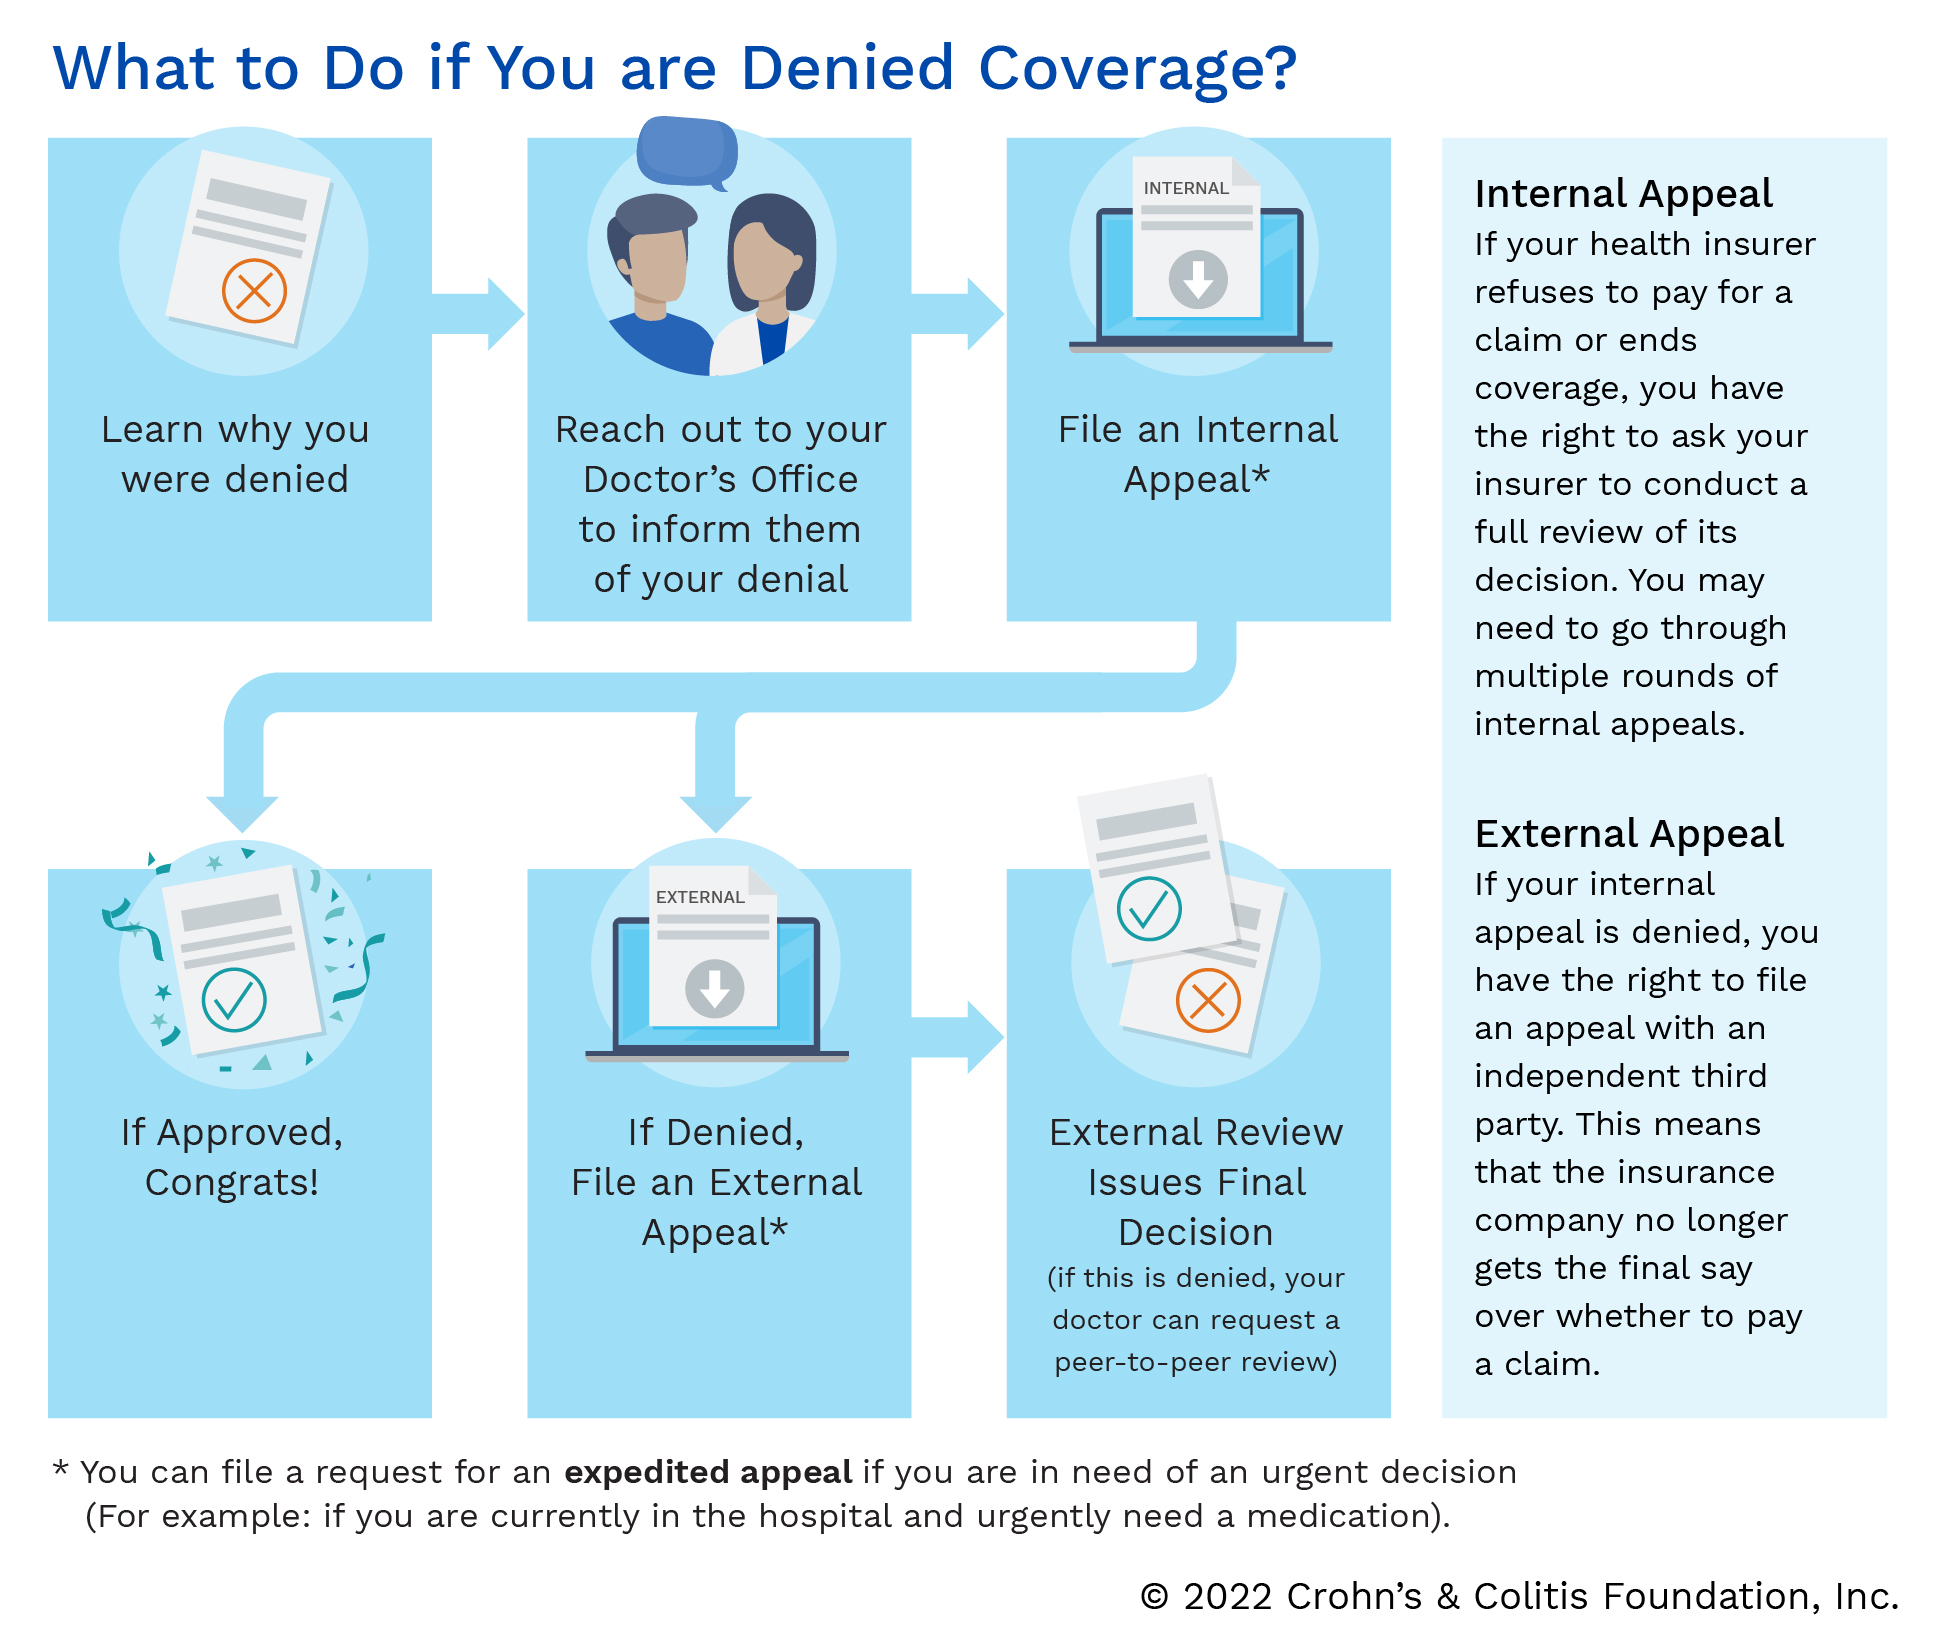 What to do if you are Denied Coverage 